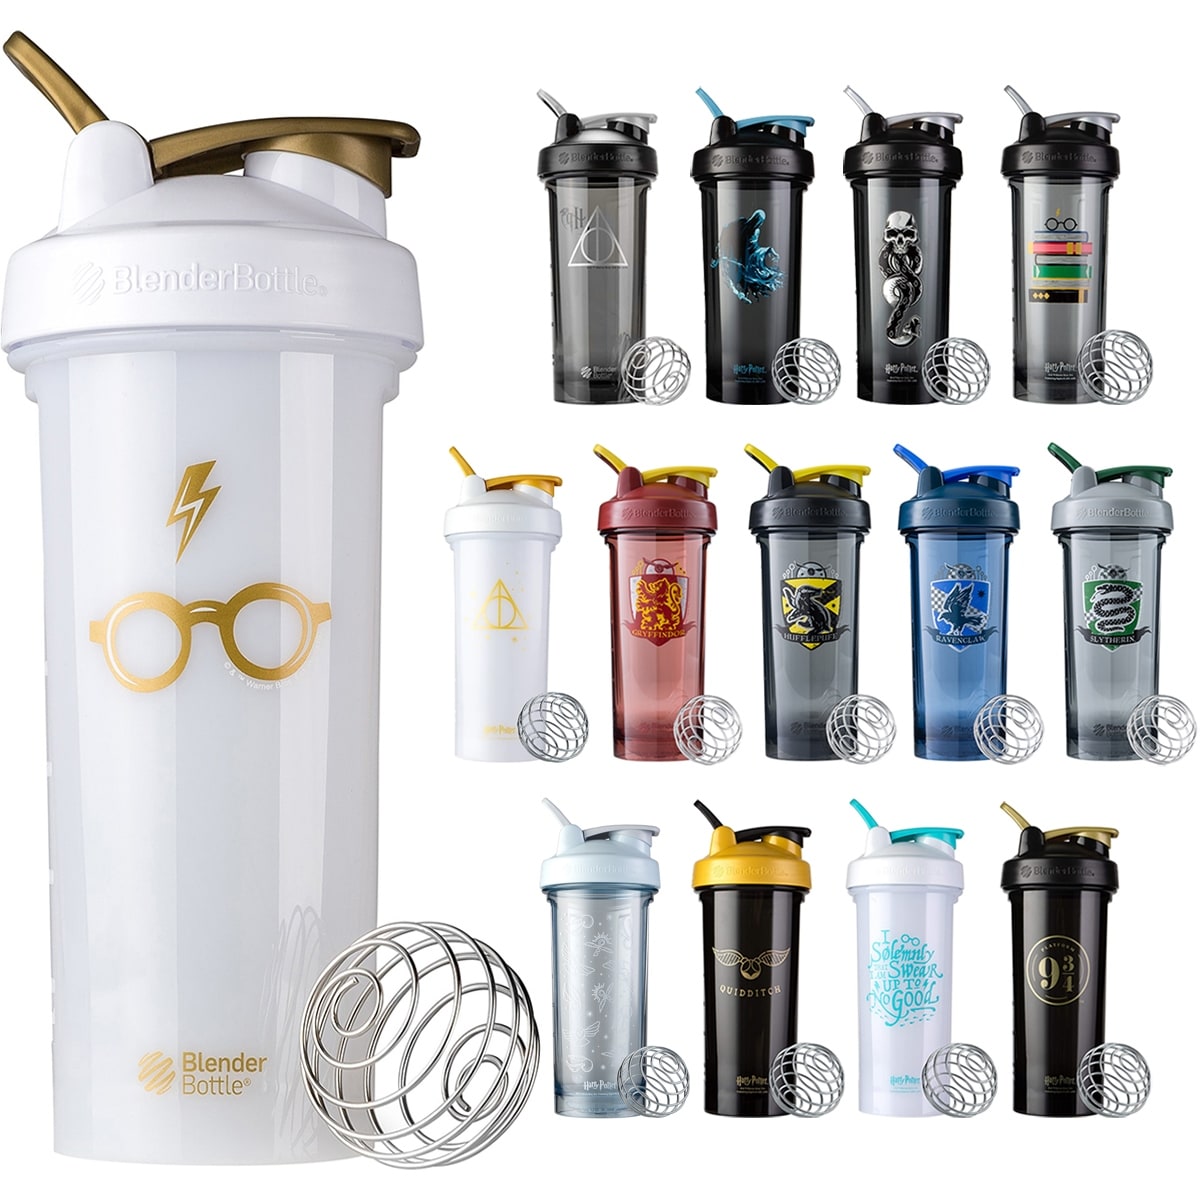 https://ak1.ostkcdn.com/images/products/is/images/direct/05029cf9d165dbca14ab3d71d08769d991366334/Blender-Bottle-Harry-Potter-Pro-Series-28-oz.-Shaker-Cup-with-Loop-Top.jpg